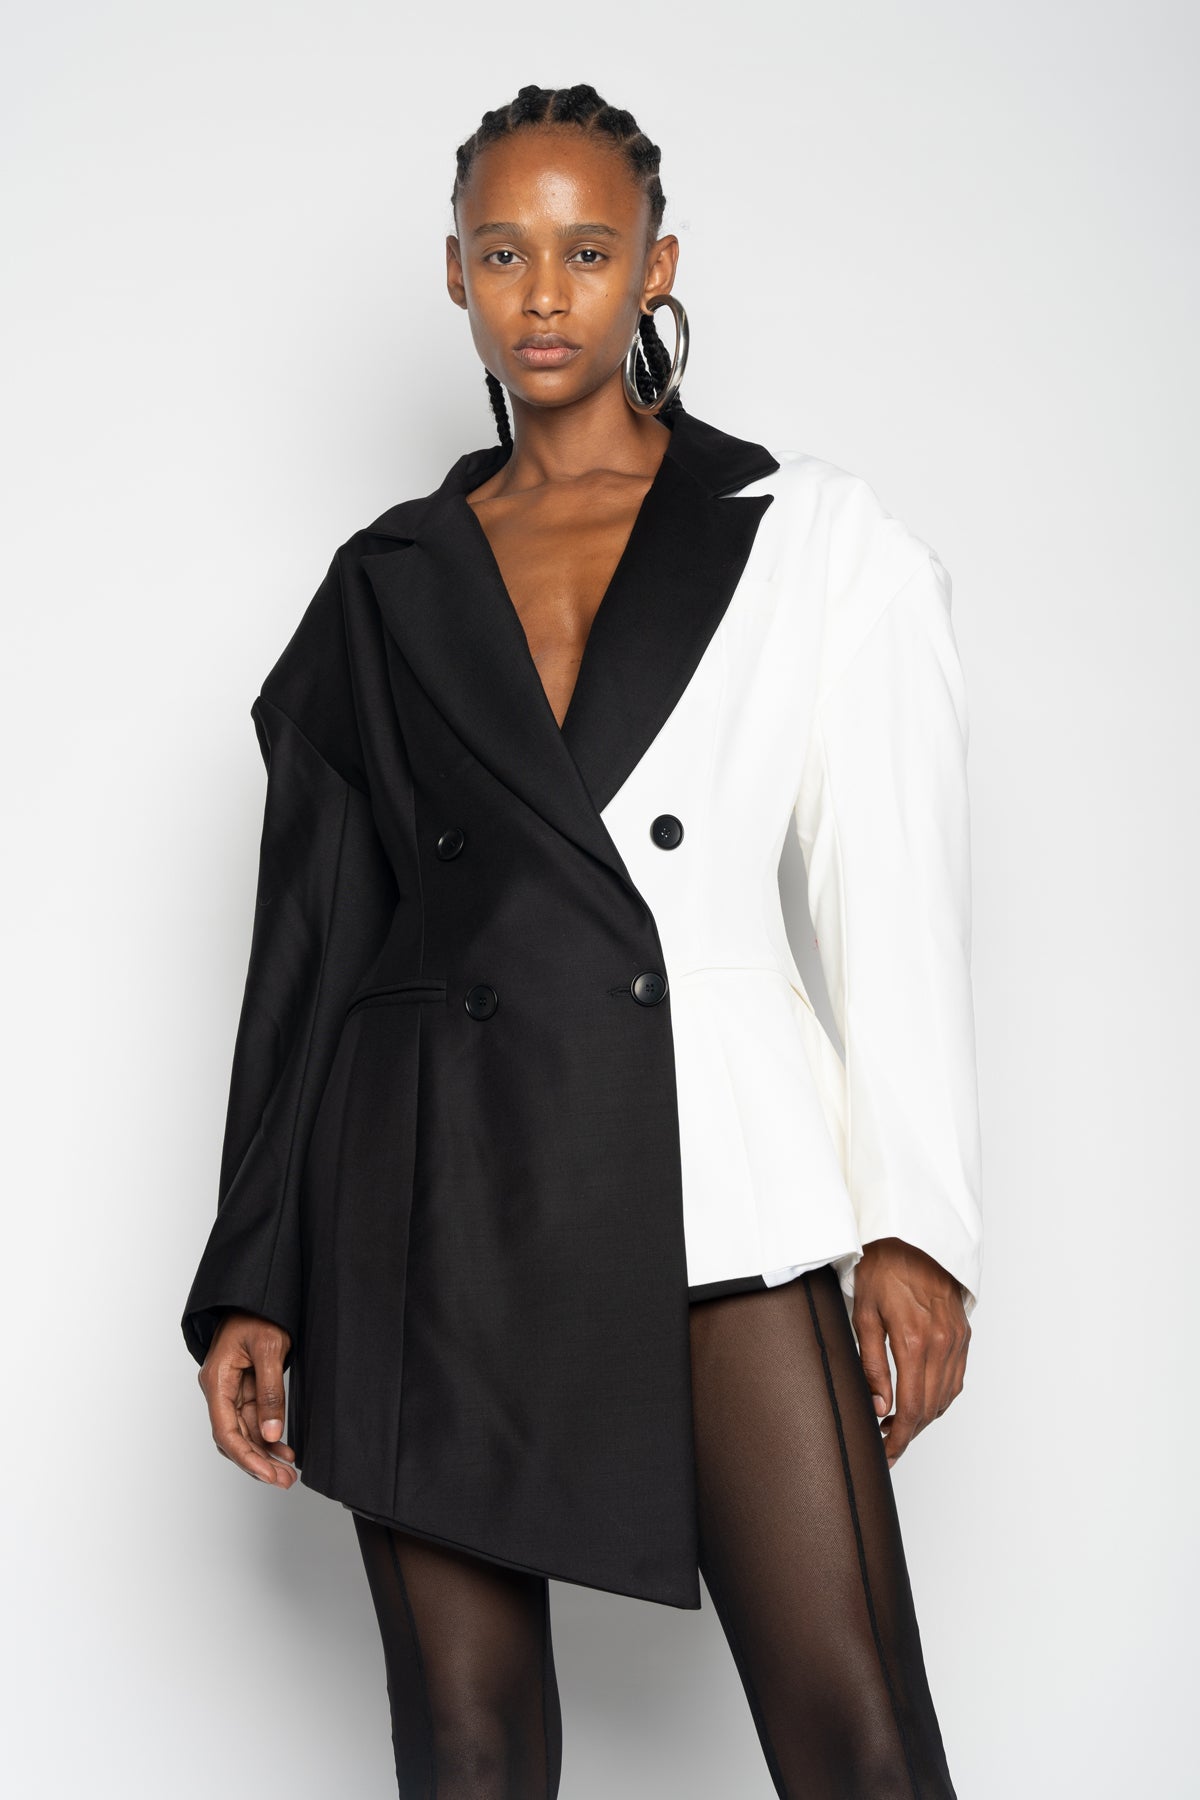 BLACK AND WHITE FITTED BLAZER marques almeida